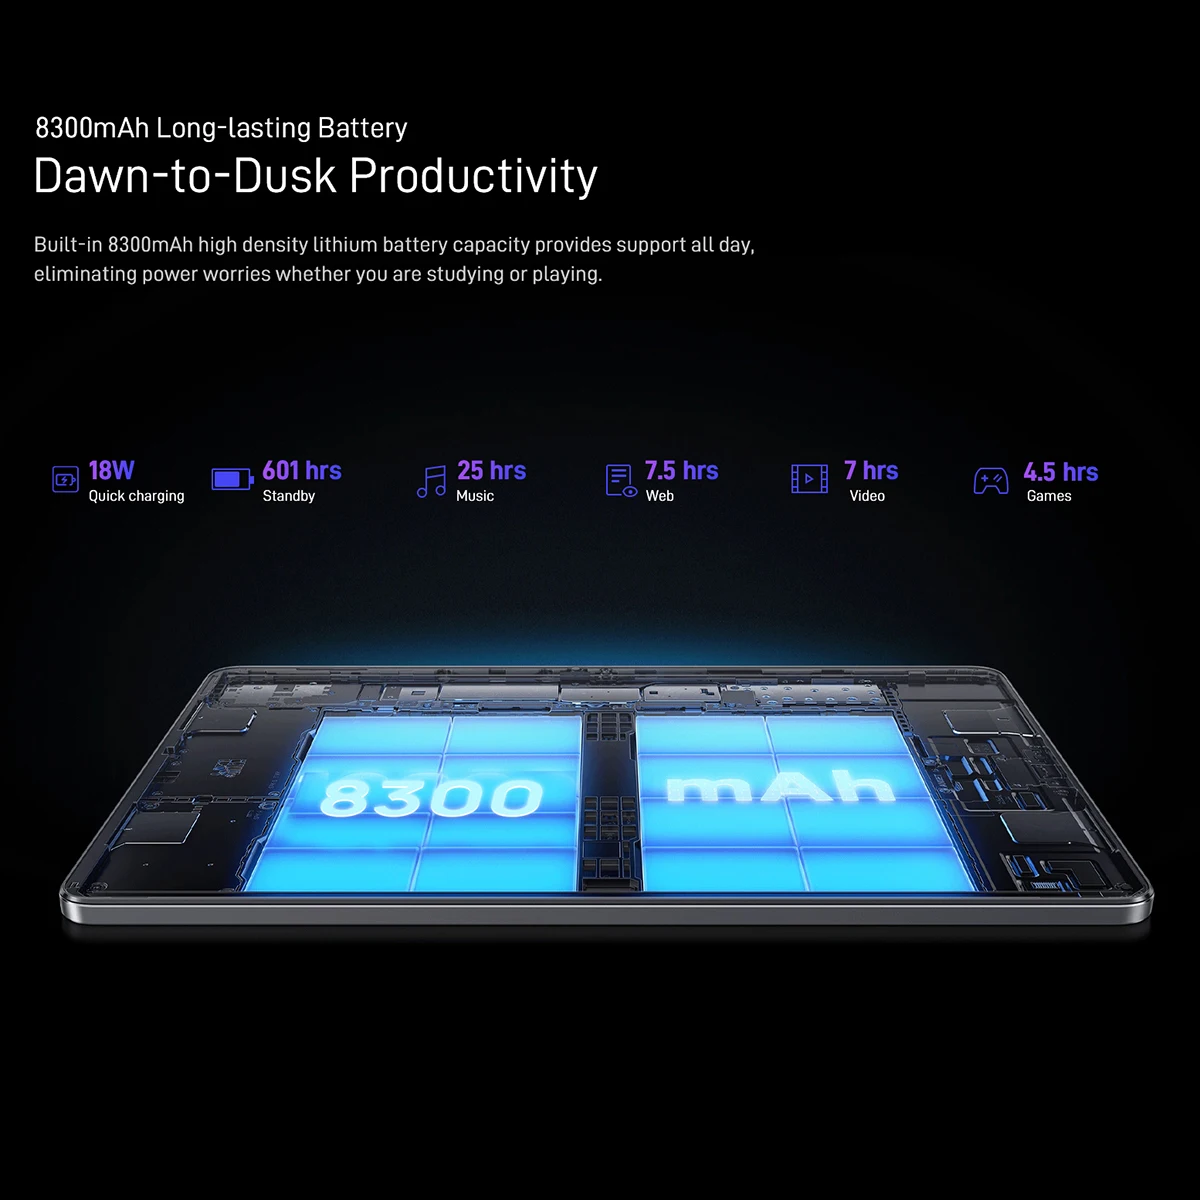 DOOGEE T10 will be launched on November 1st as their first ever tablet 